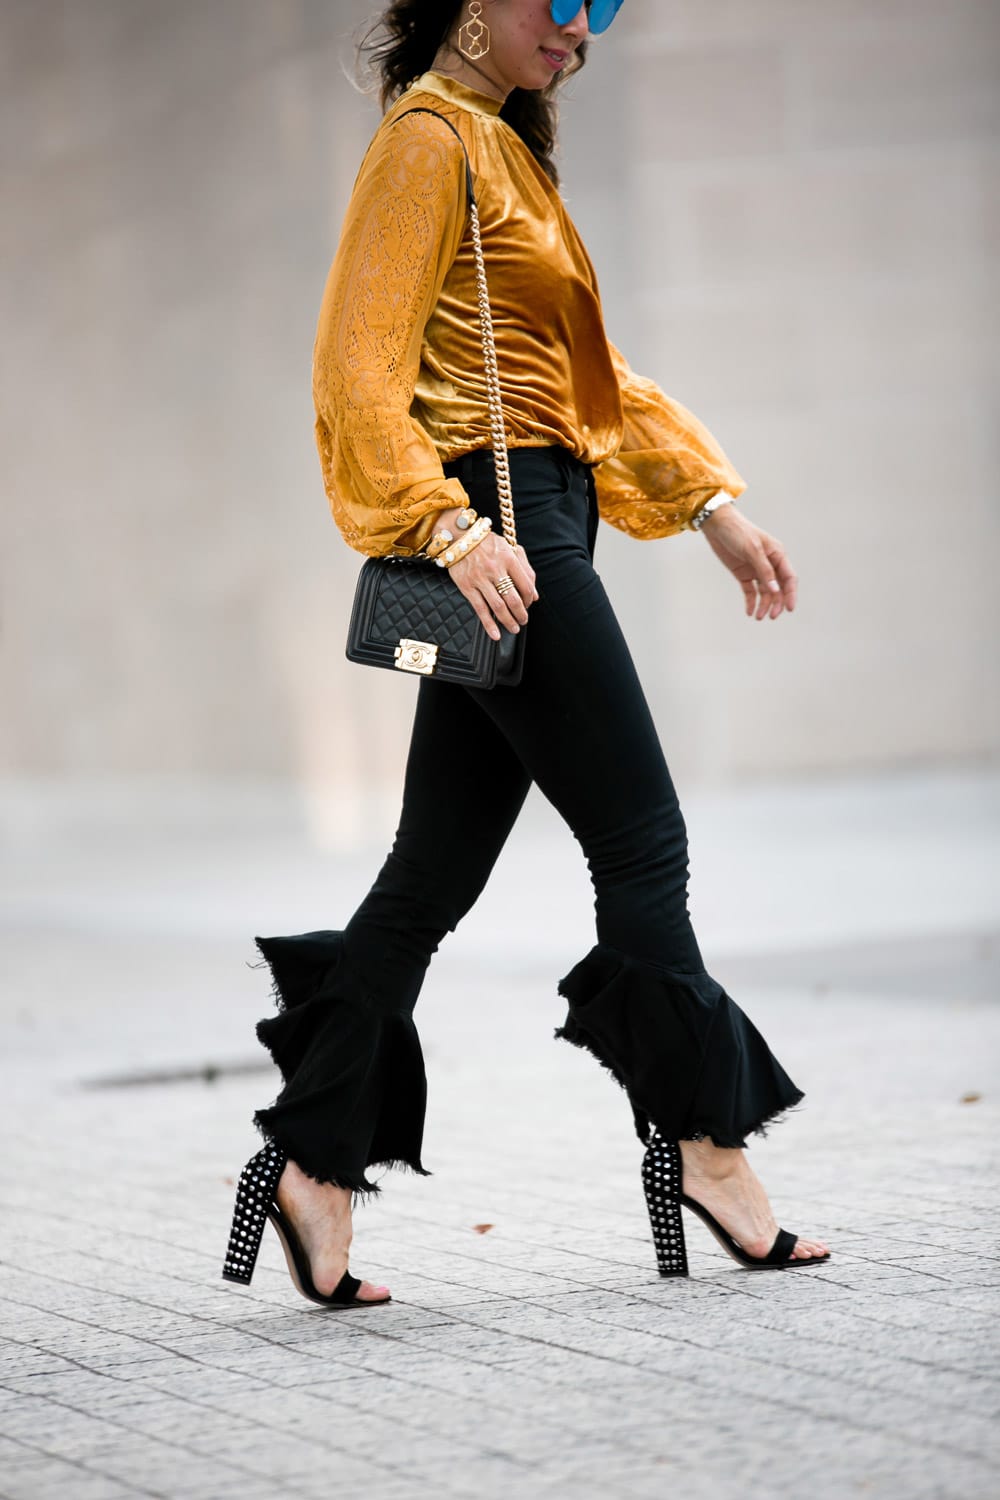 marigold velvet lace top citizens of humanity drew flounce jeans chanel boy bag dolce vita studded sandals